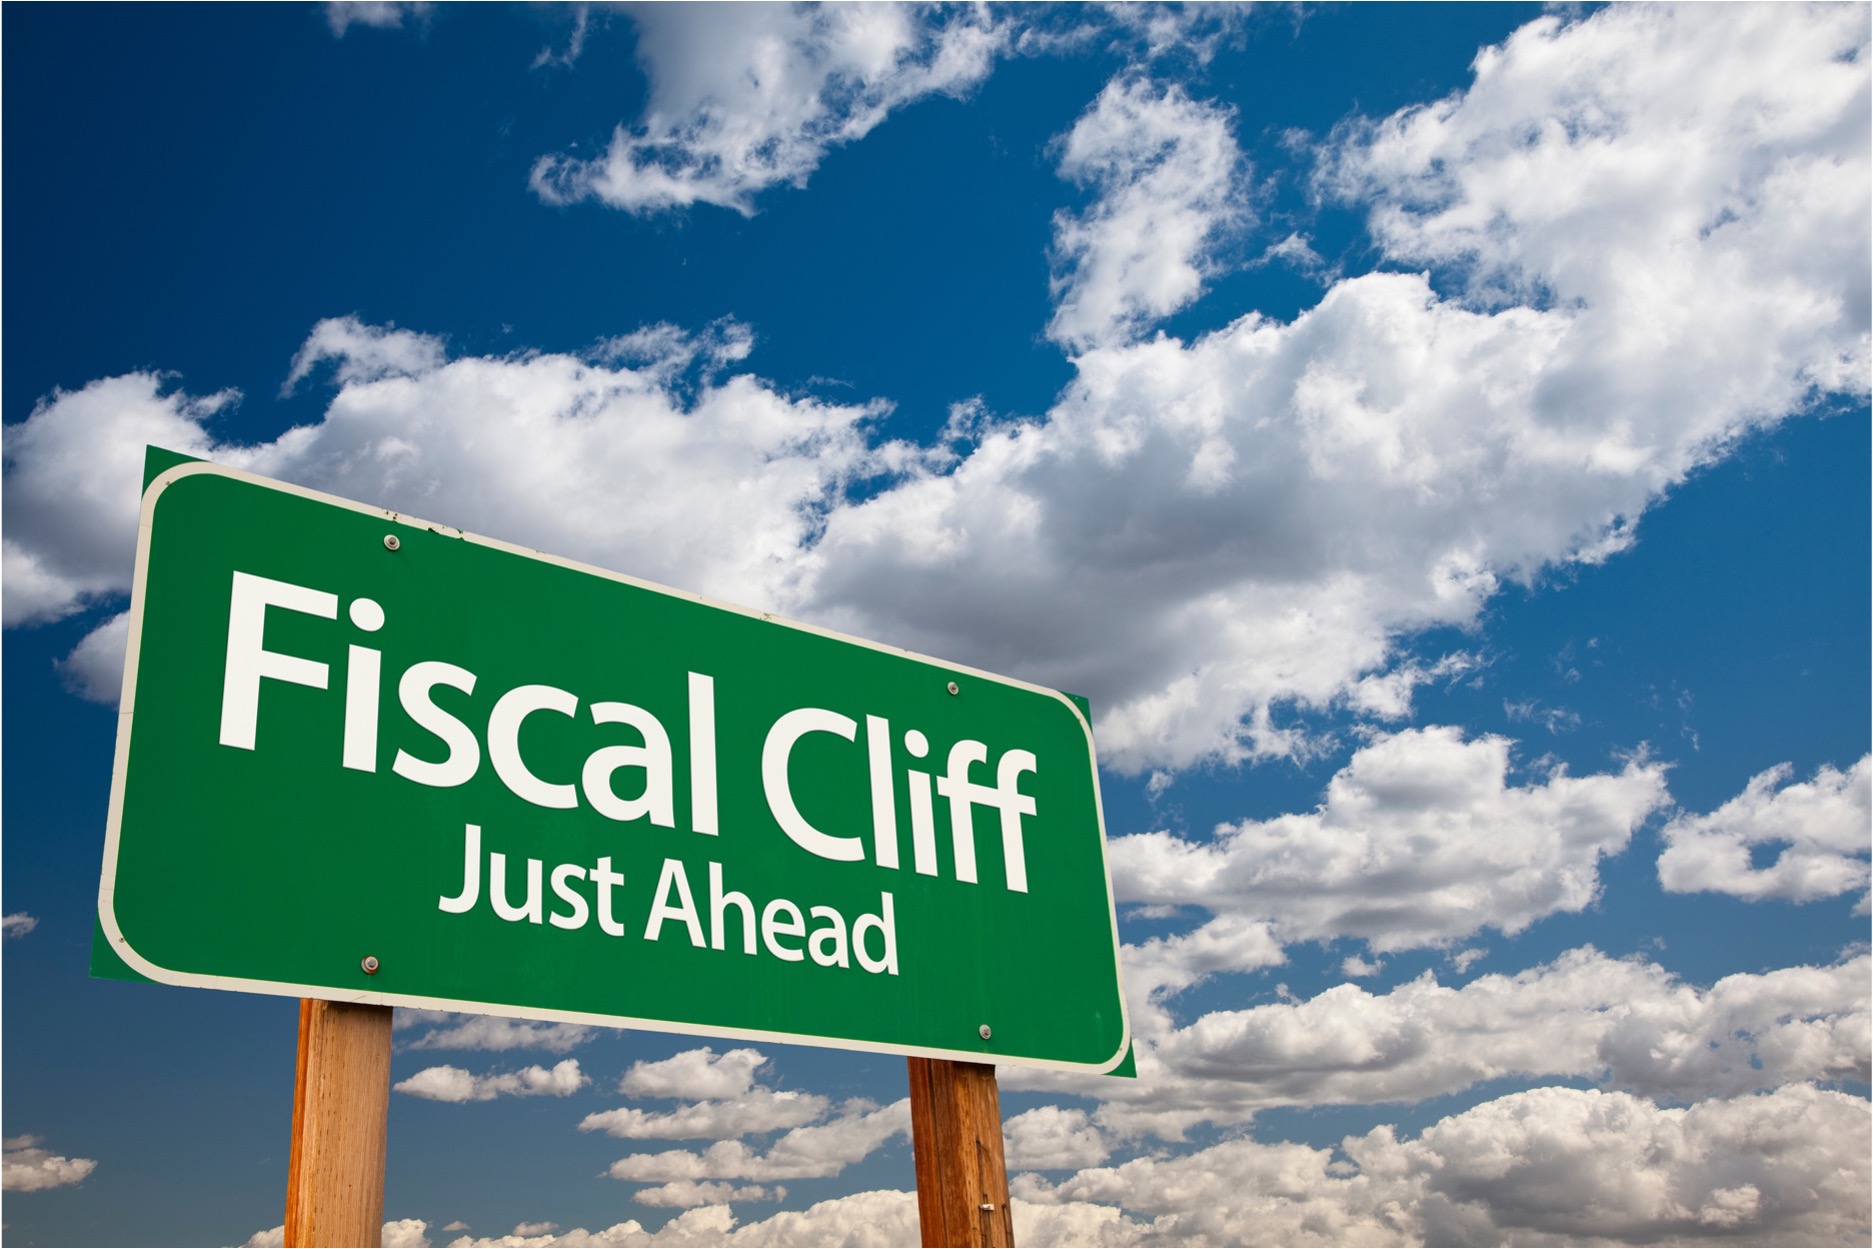 "Fiscal Cliff Just Ahead" highway sign against background of sky and clouds